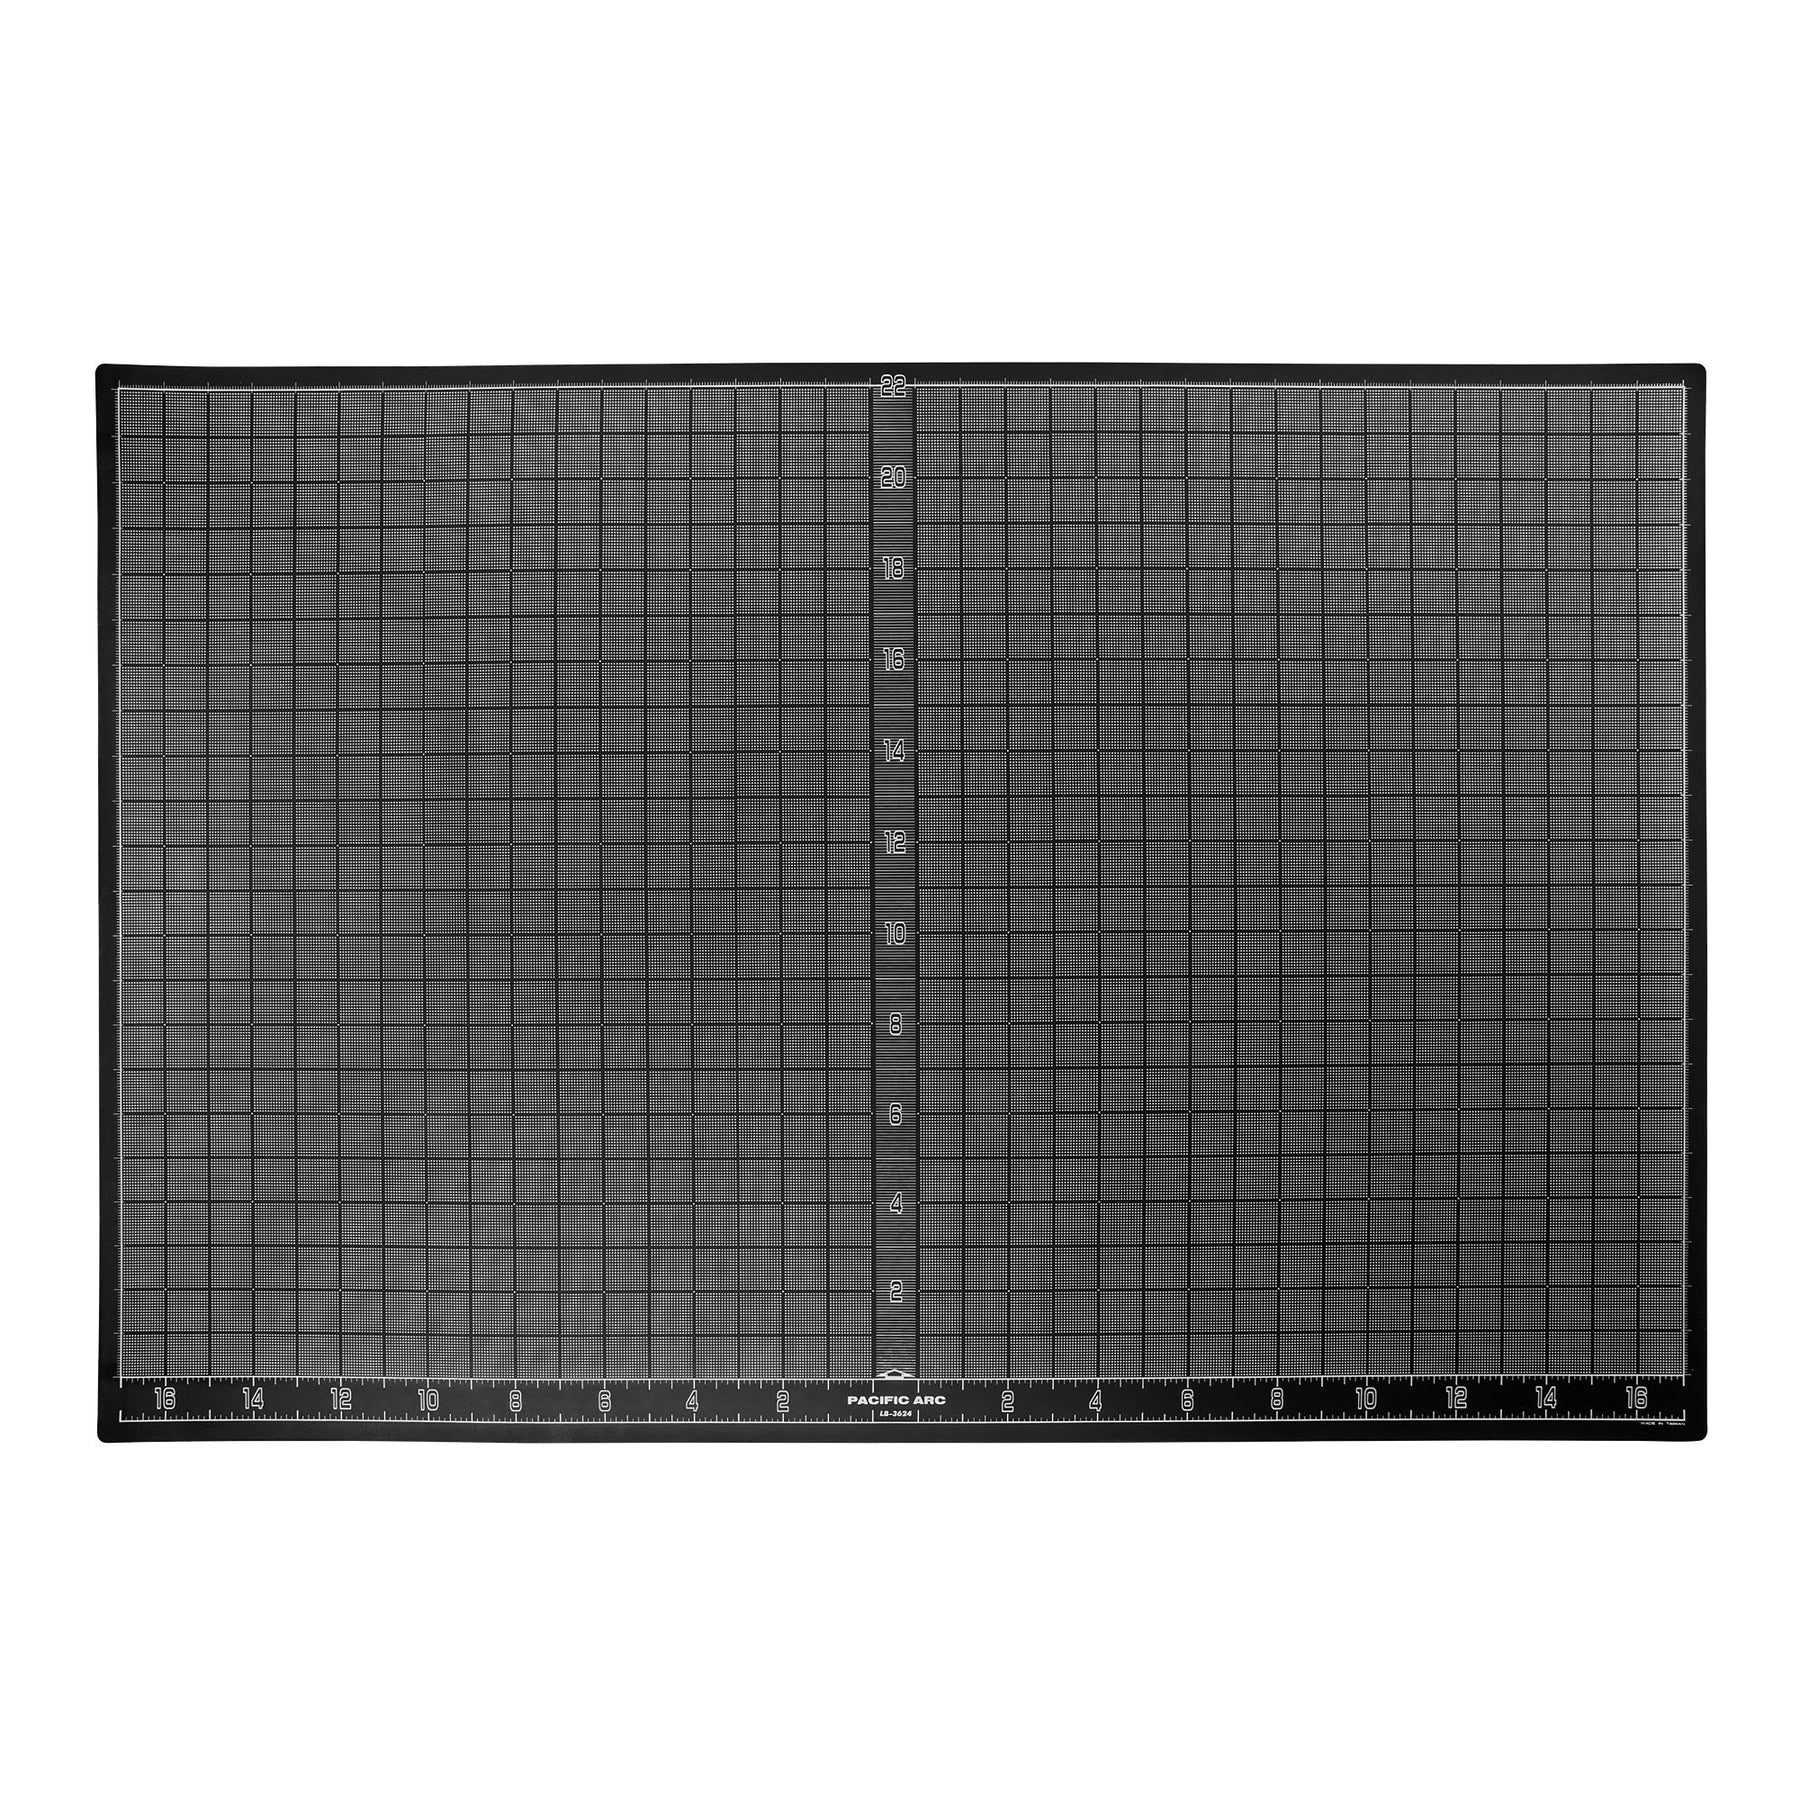 Pacific Arc, Cutting Mat: 3-ply, fully gridded - black